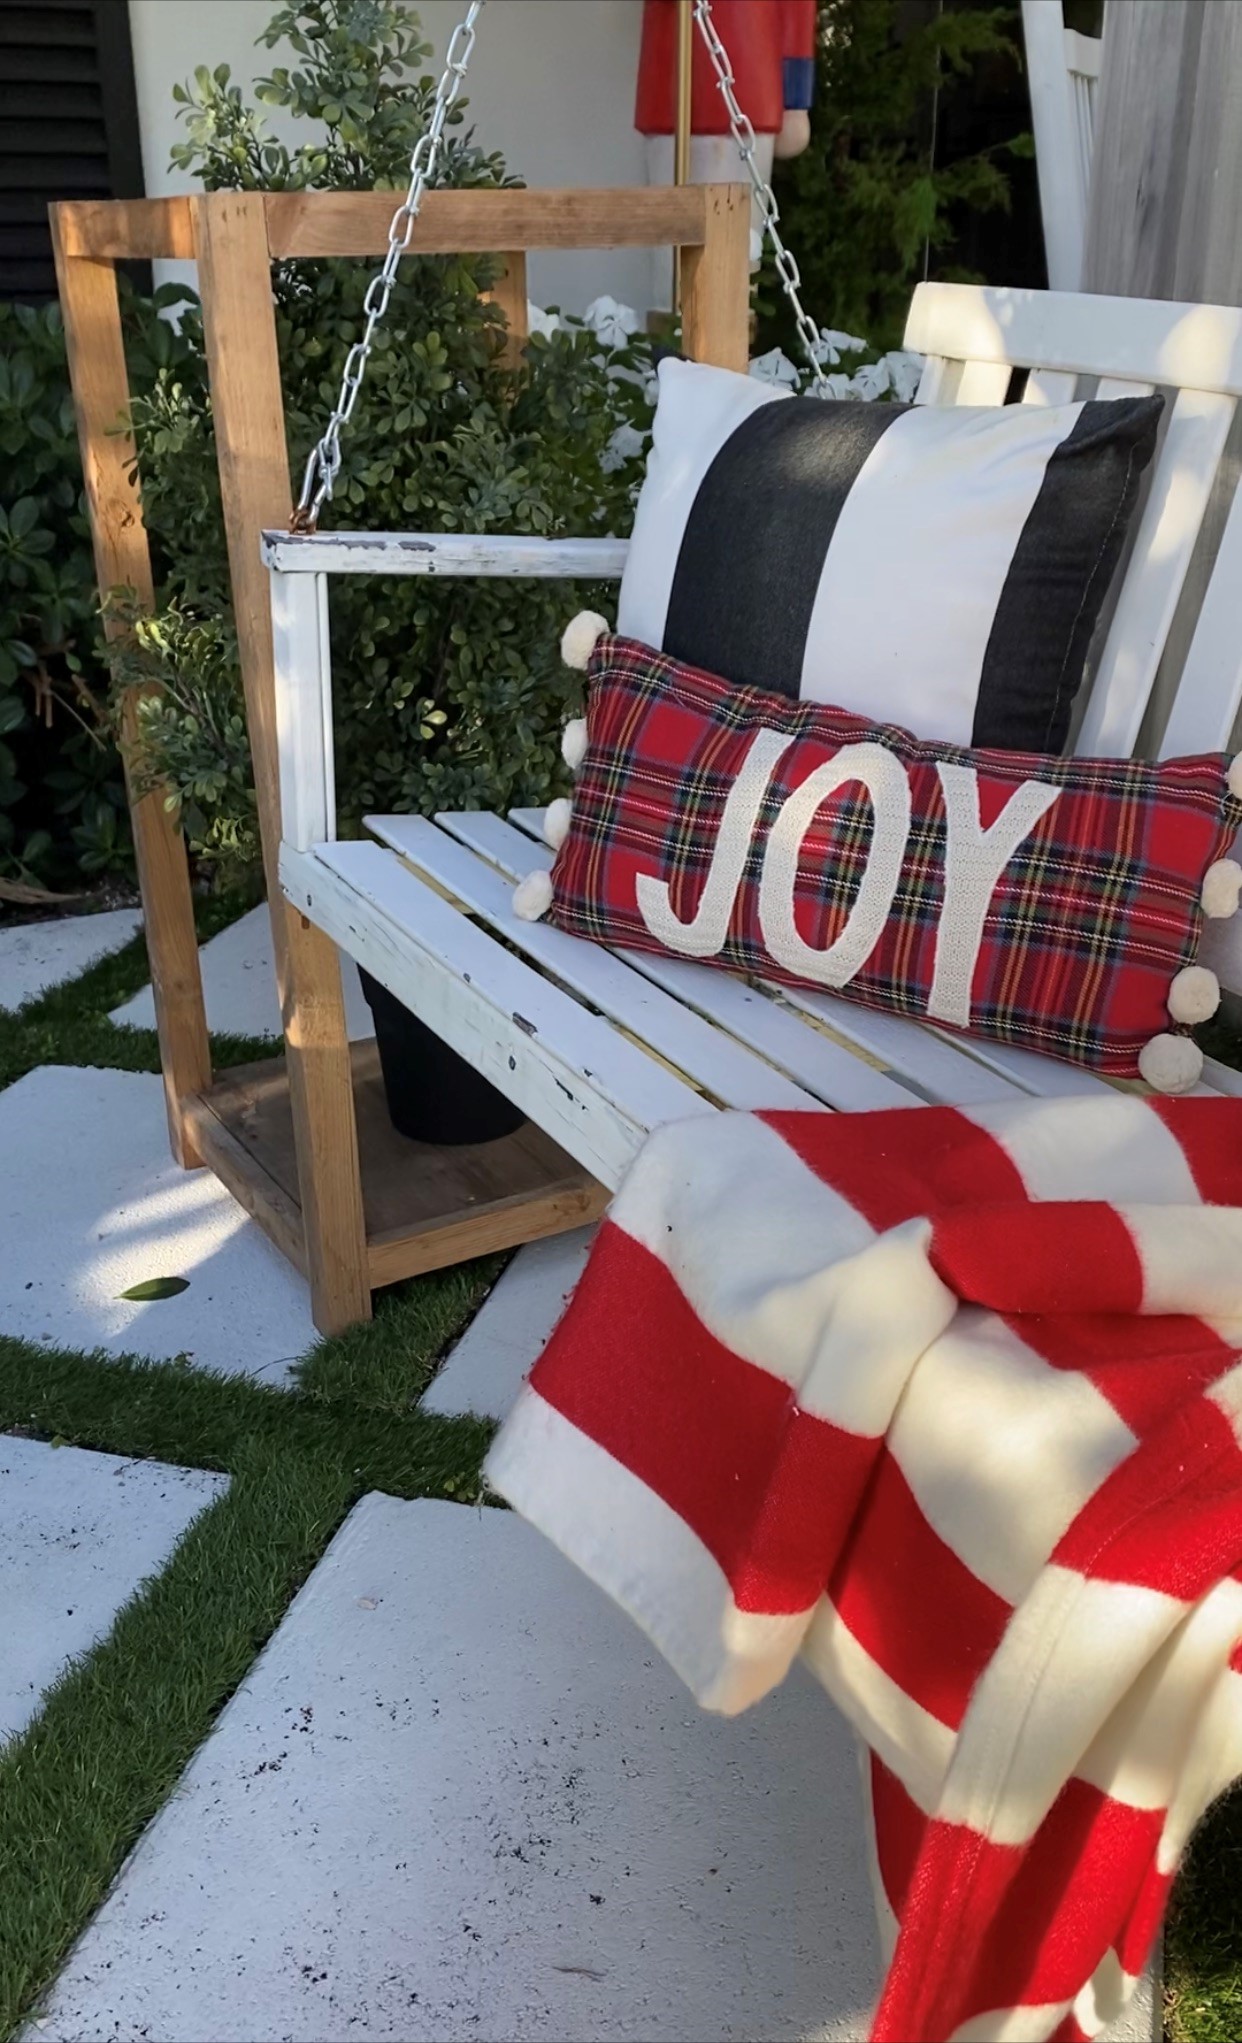 porch swing styled with Christmas pillows and a bright red throw blanket with a wooden lantern stand and Christmas tree inside